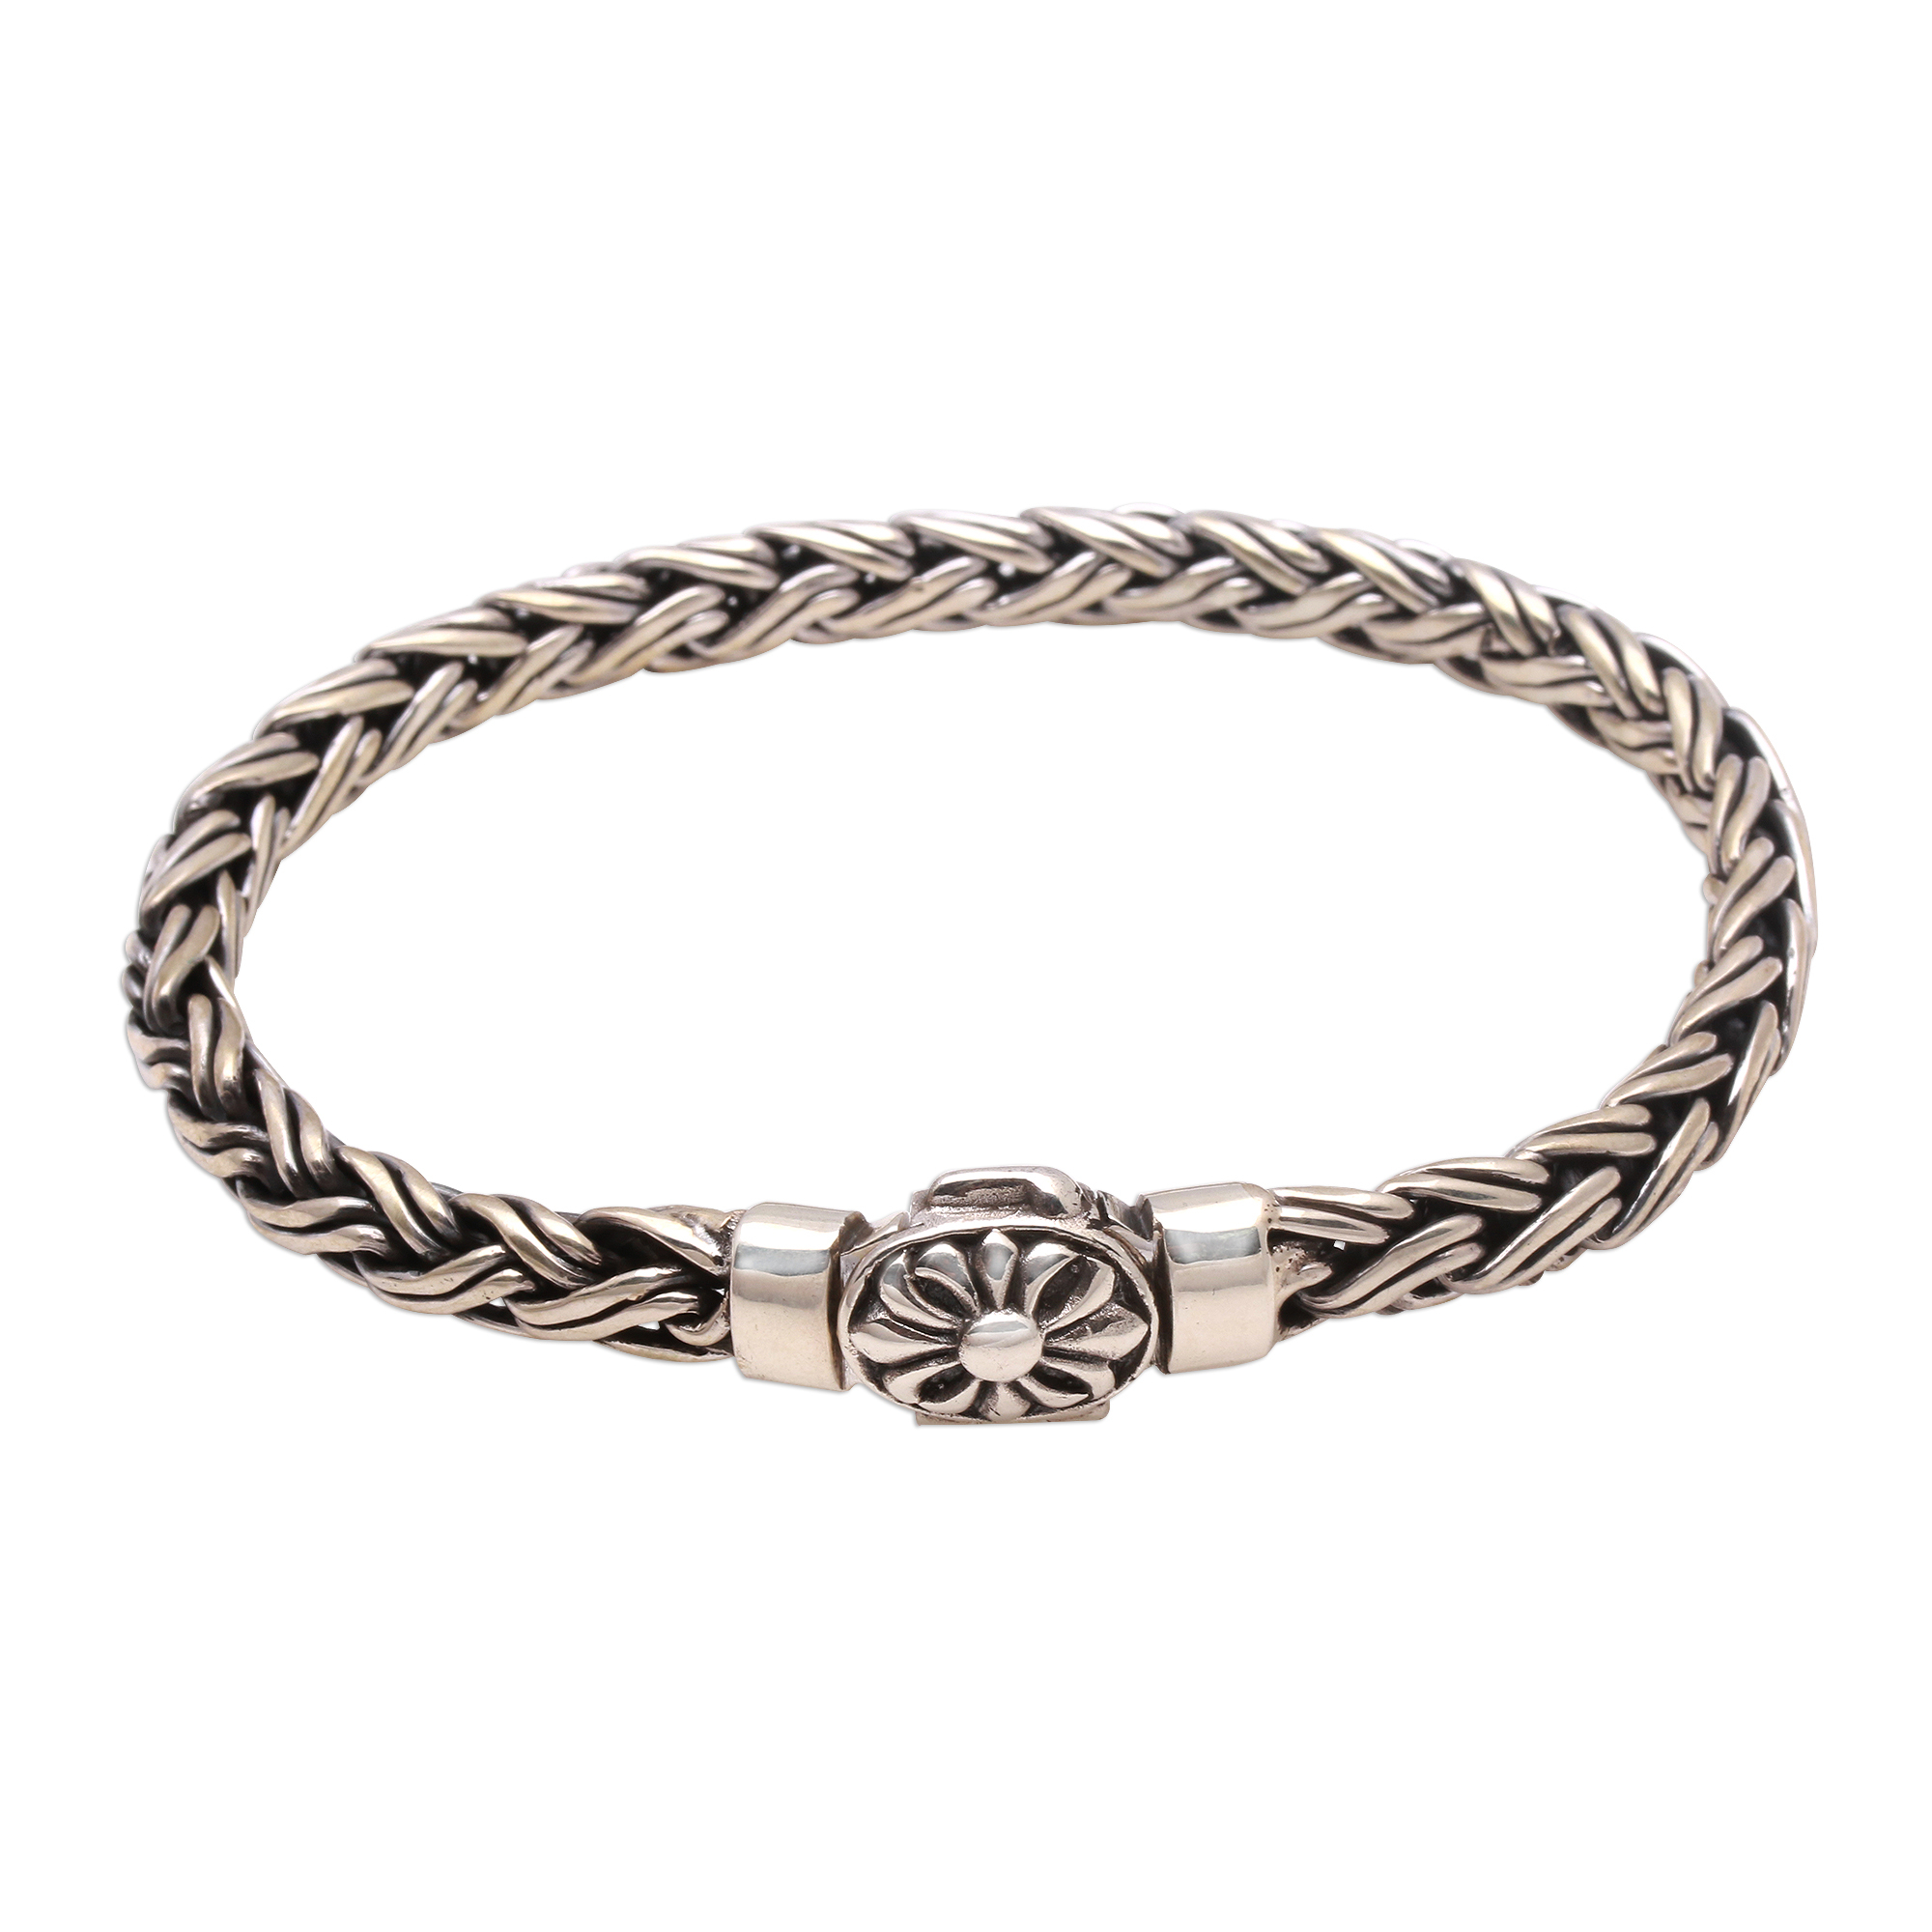 Sterling Silver Wheat Chain Bracelet from Bali - Charming Wheat | NOVICA